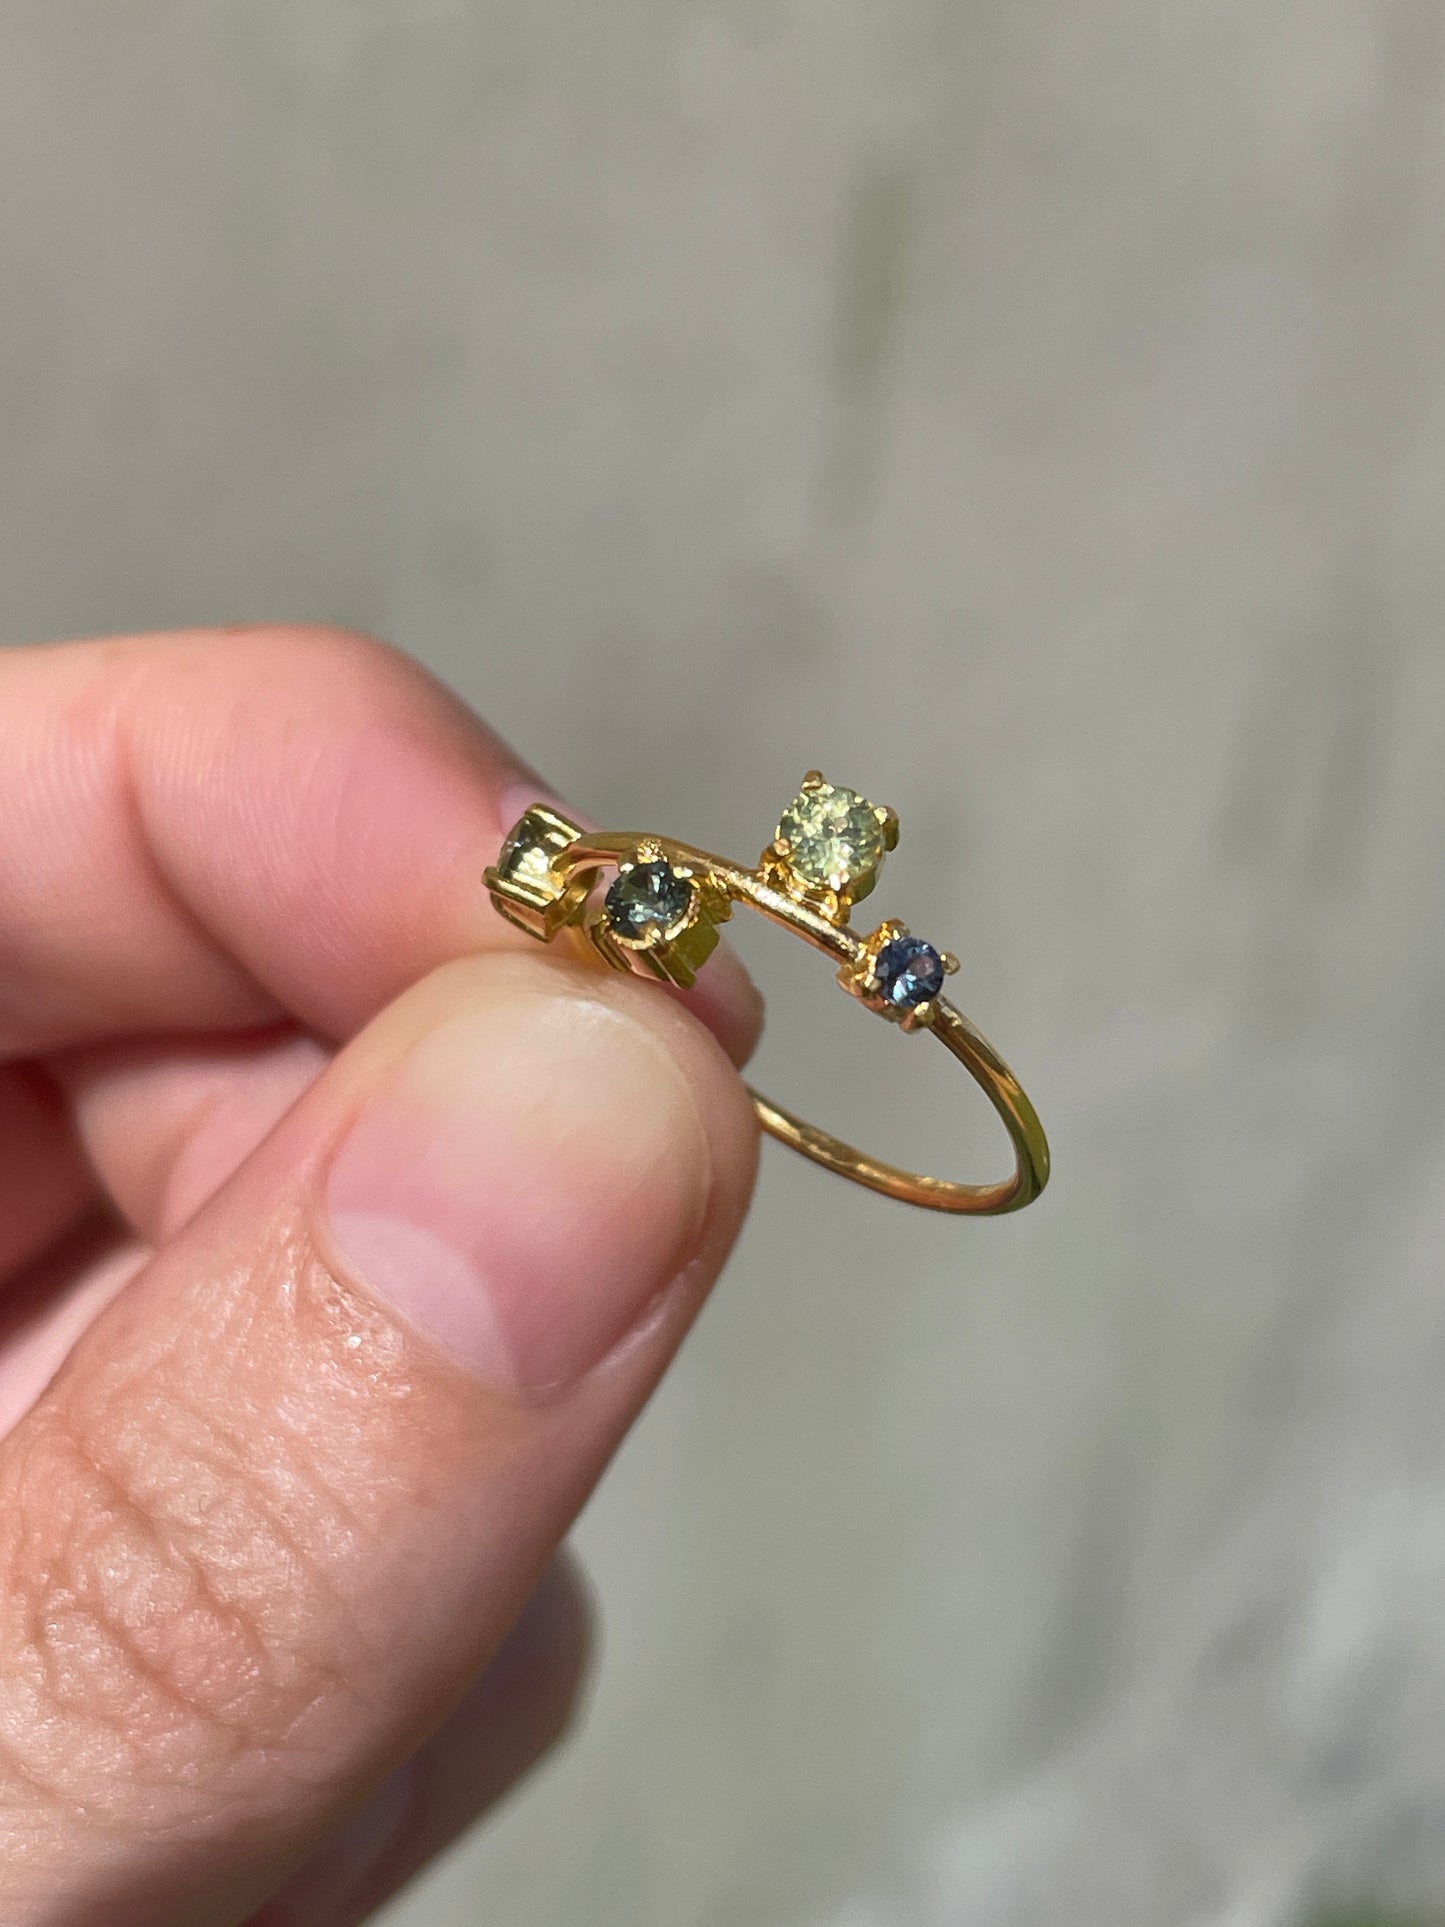 Galaxy Ring Gold with Tropical Green Sapphires and Tourmalines - size 7